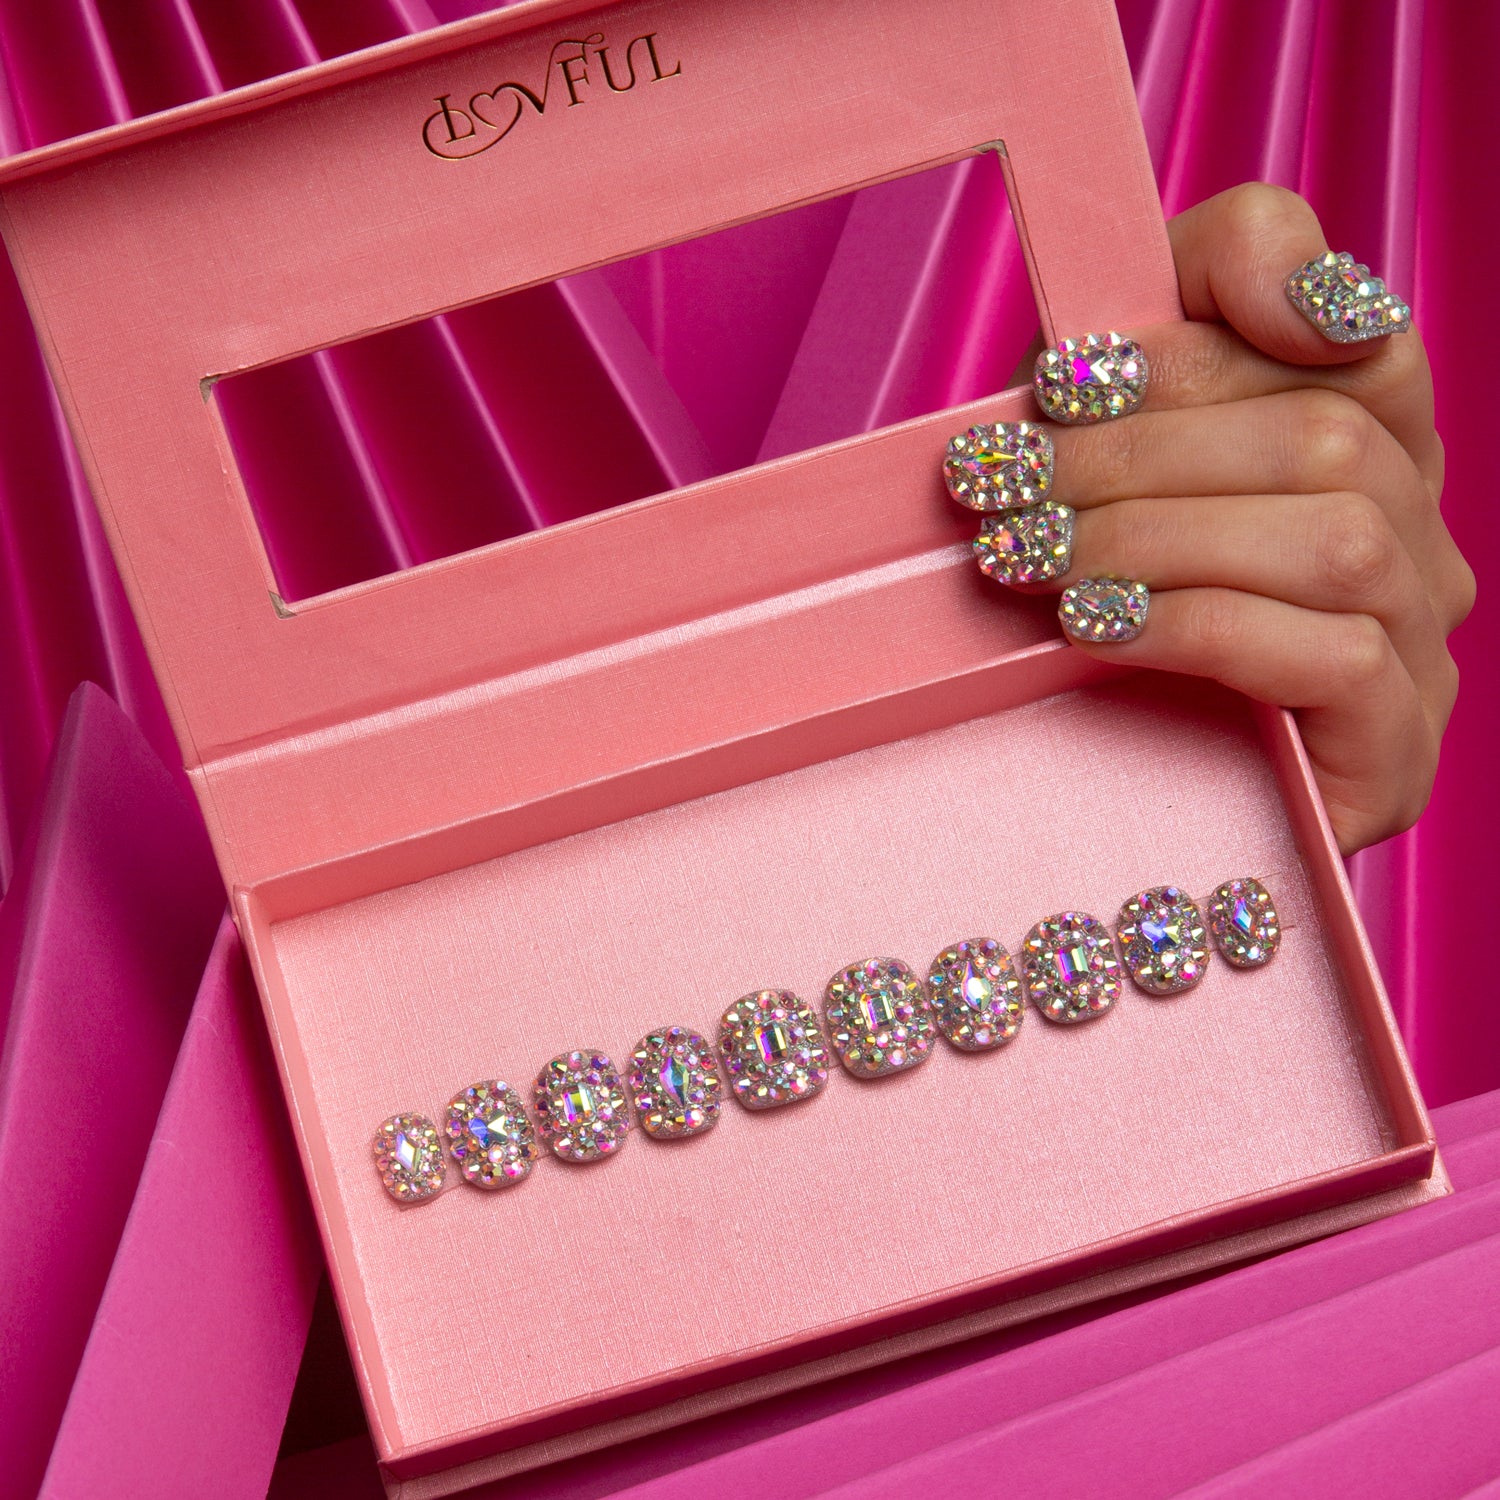 Press-on nails with crystals are the most dazzling accessory for any occasion